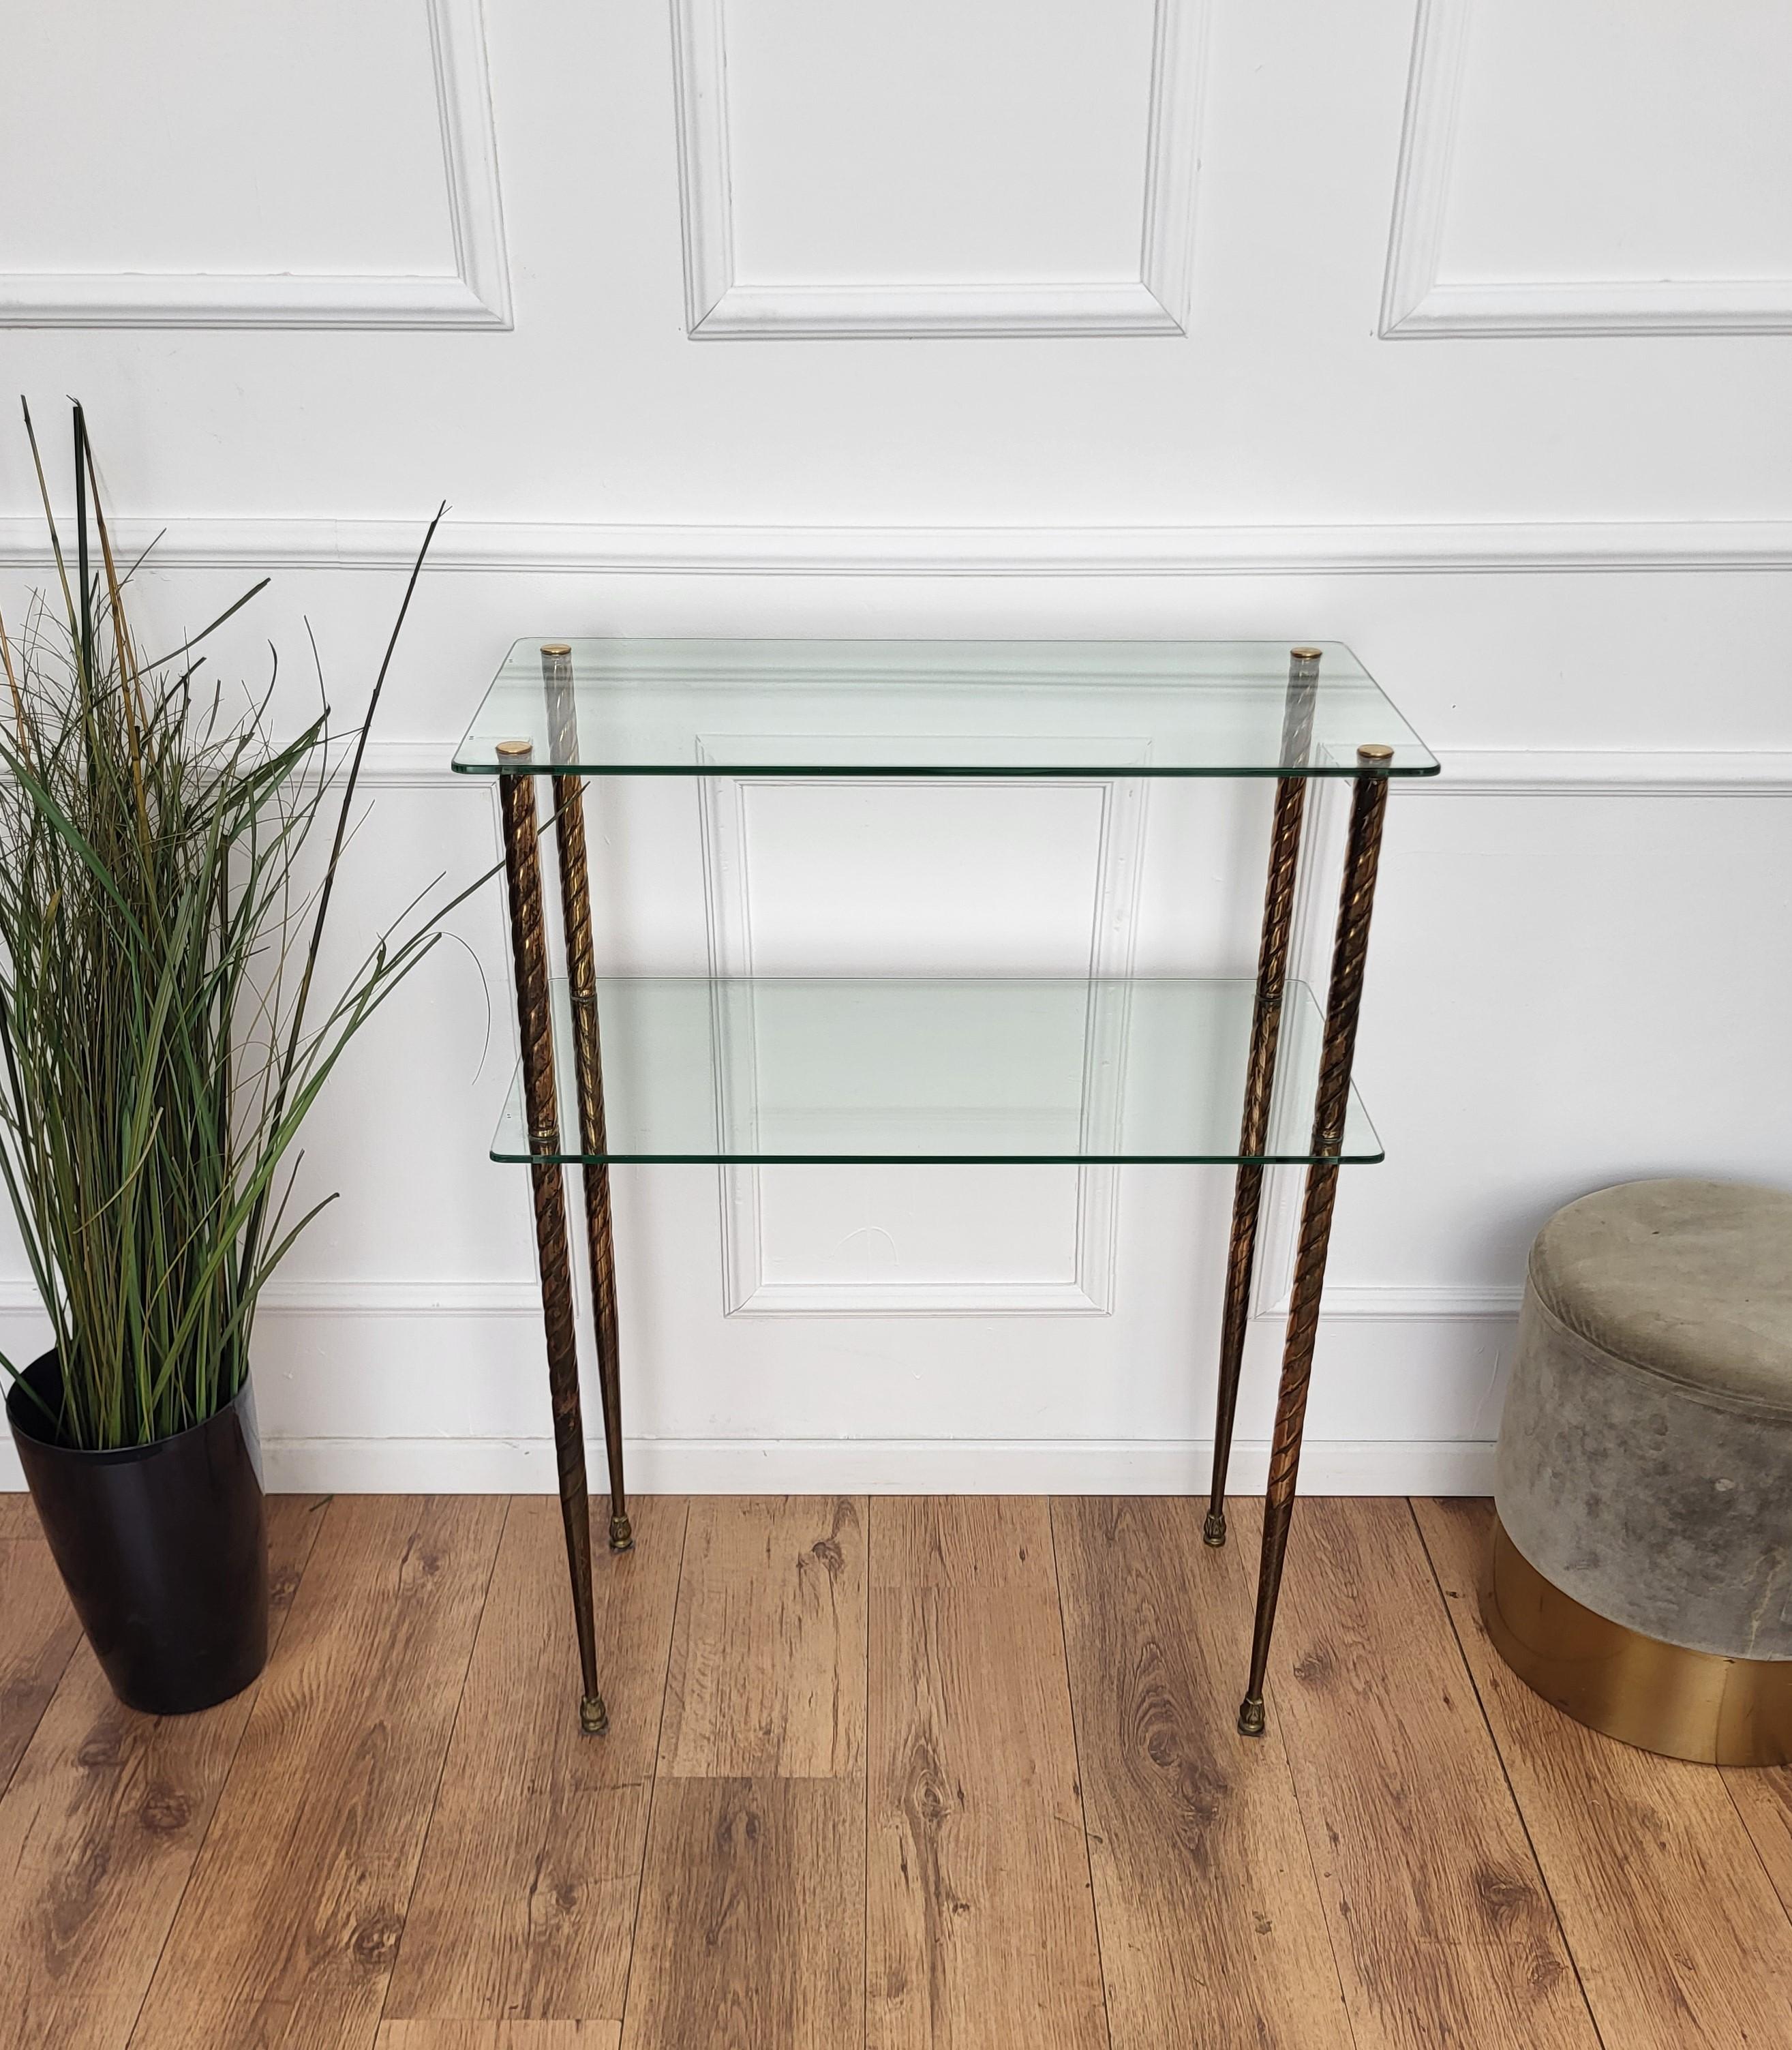 1980s Hollywood Regency Mid-Century Modern Brass Glass Etagere Console Table For Sale 1